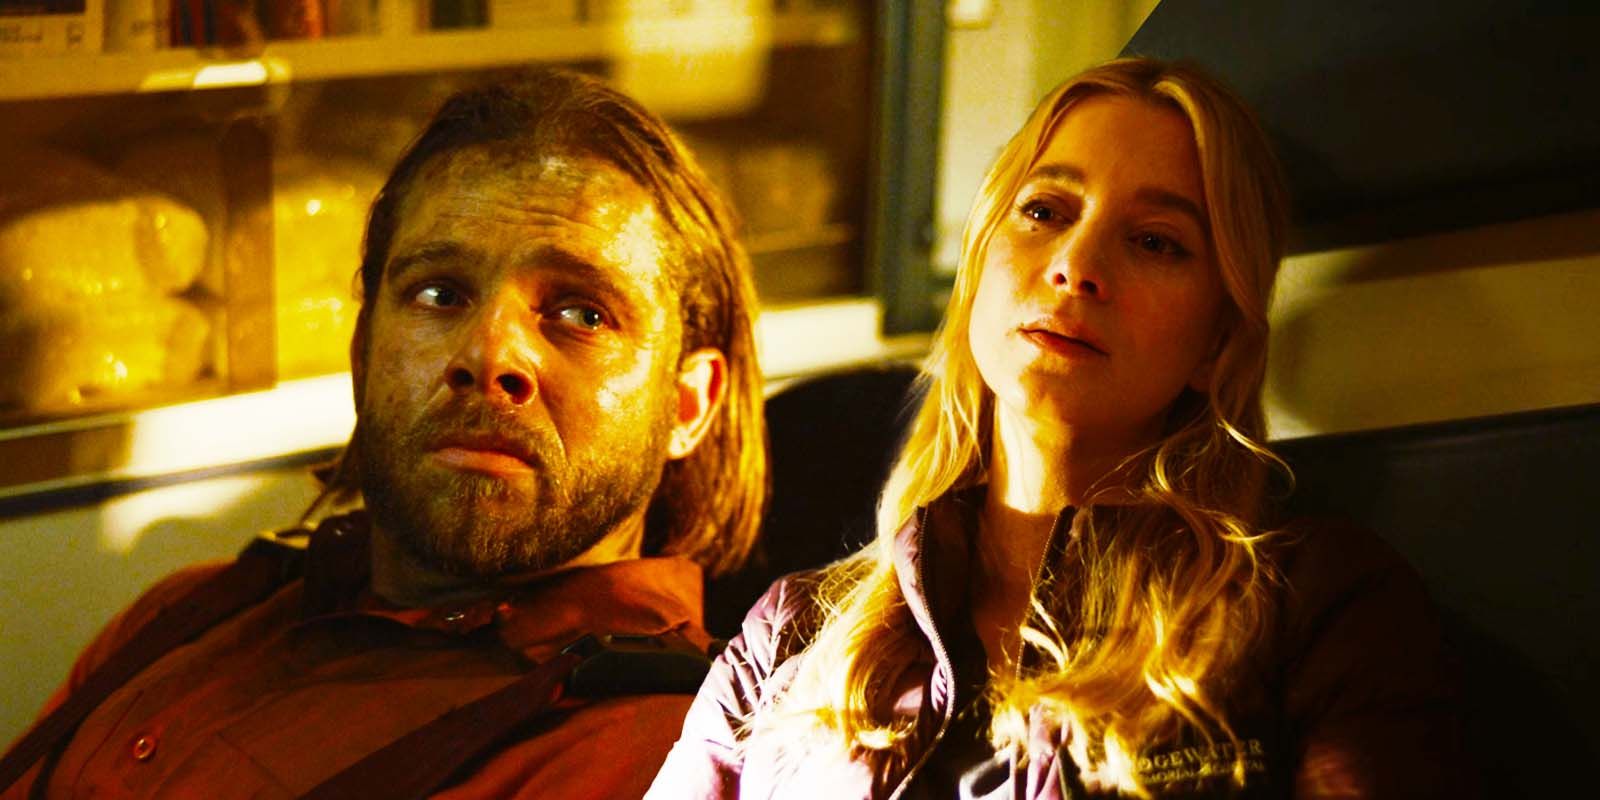 Max Thieriot as Bode Leone and Sabina Gadecki as Cara in Fire Country season 2, episode 4